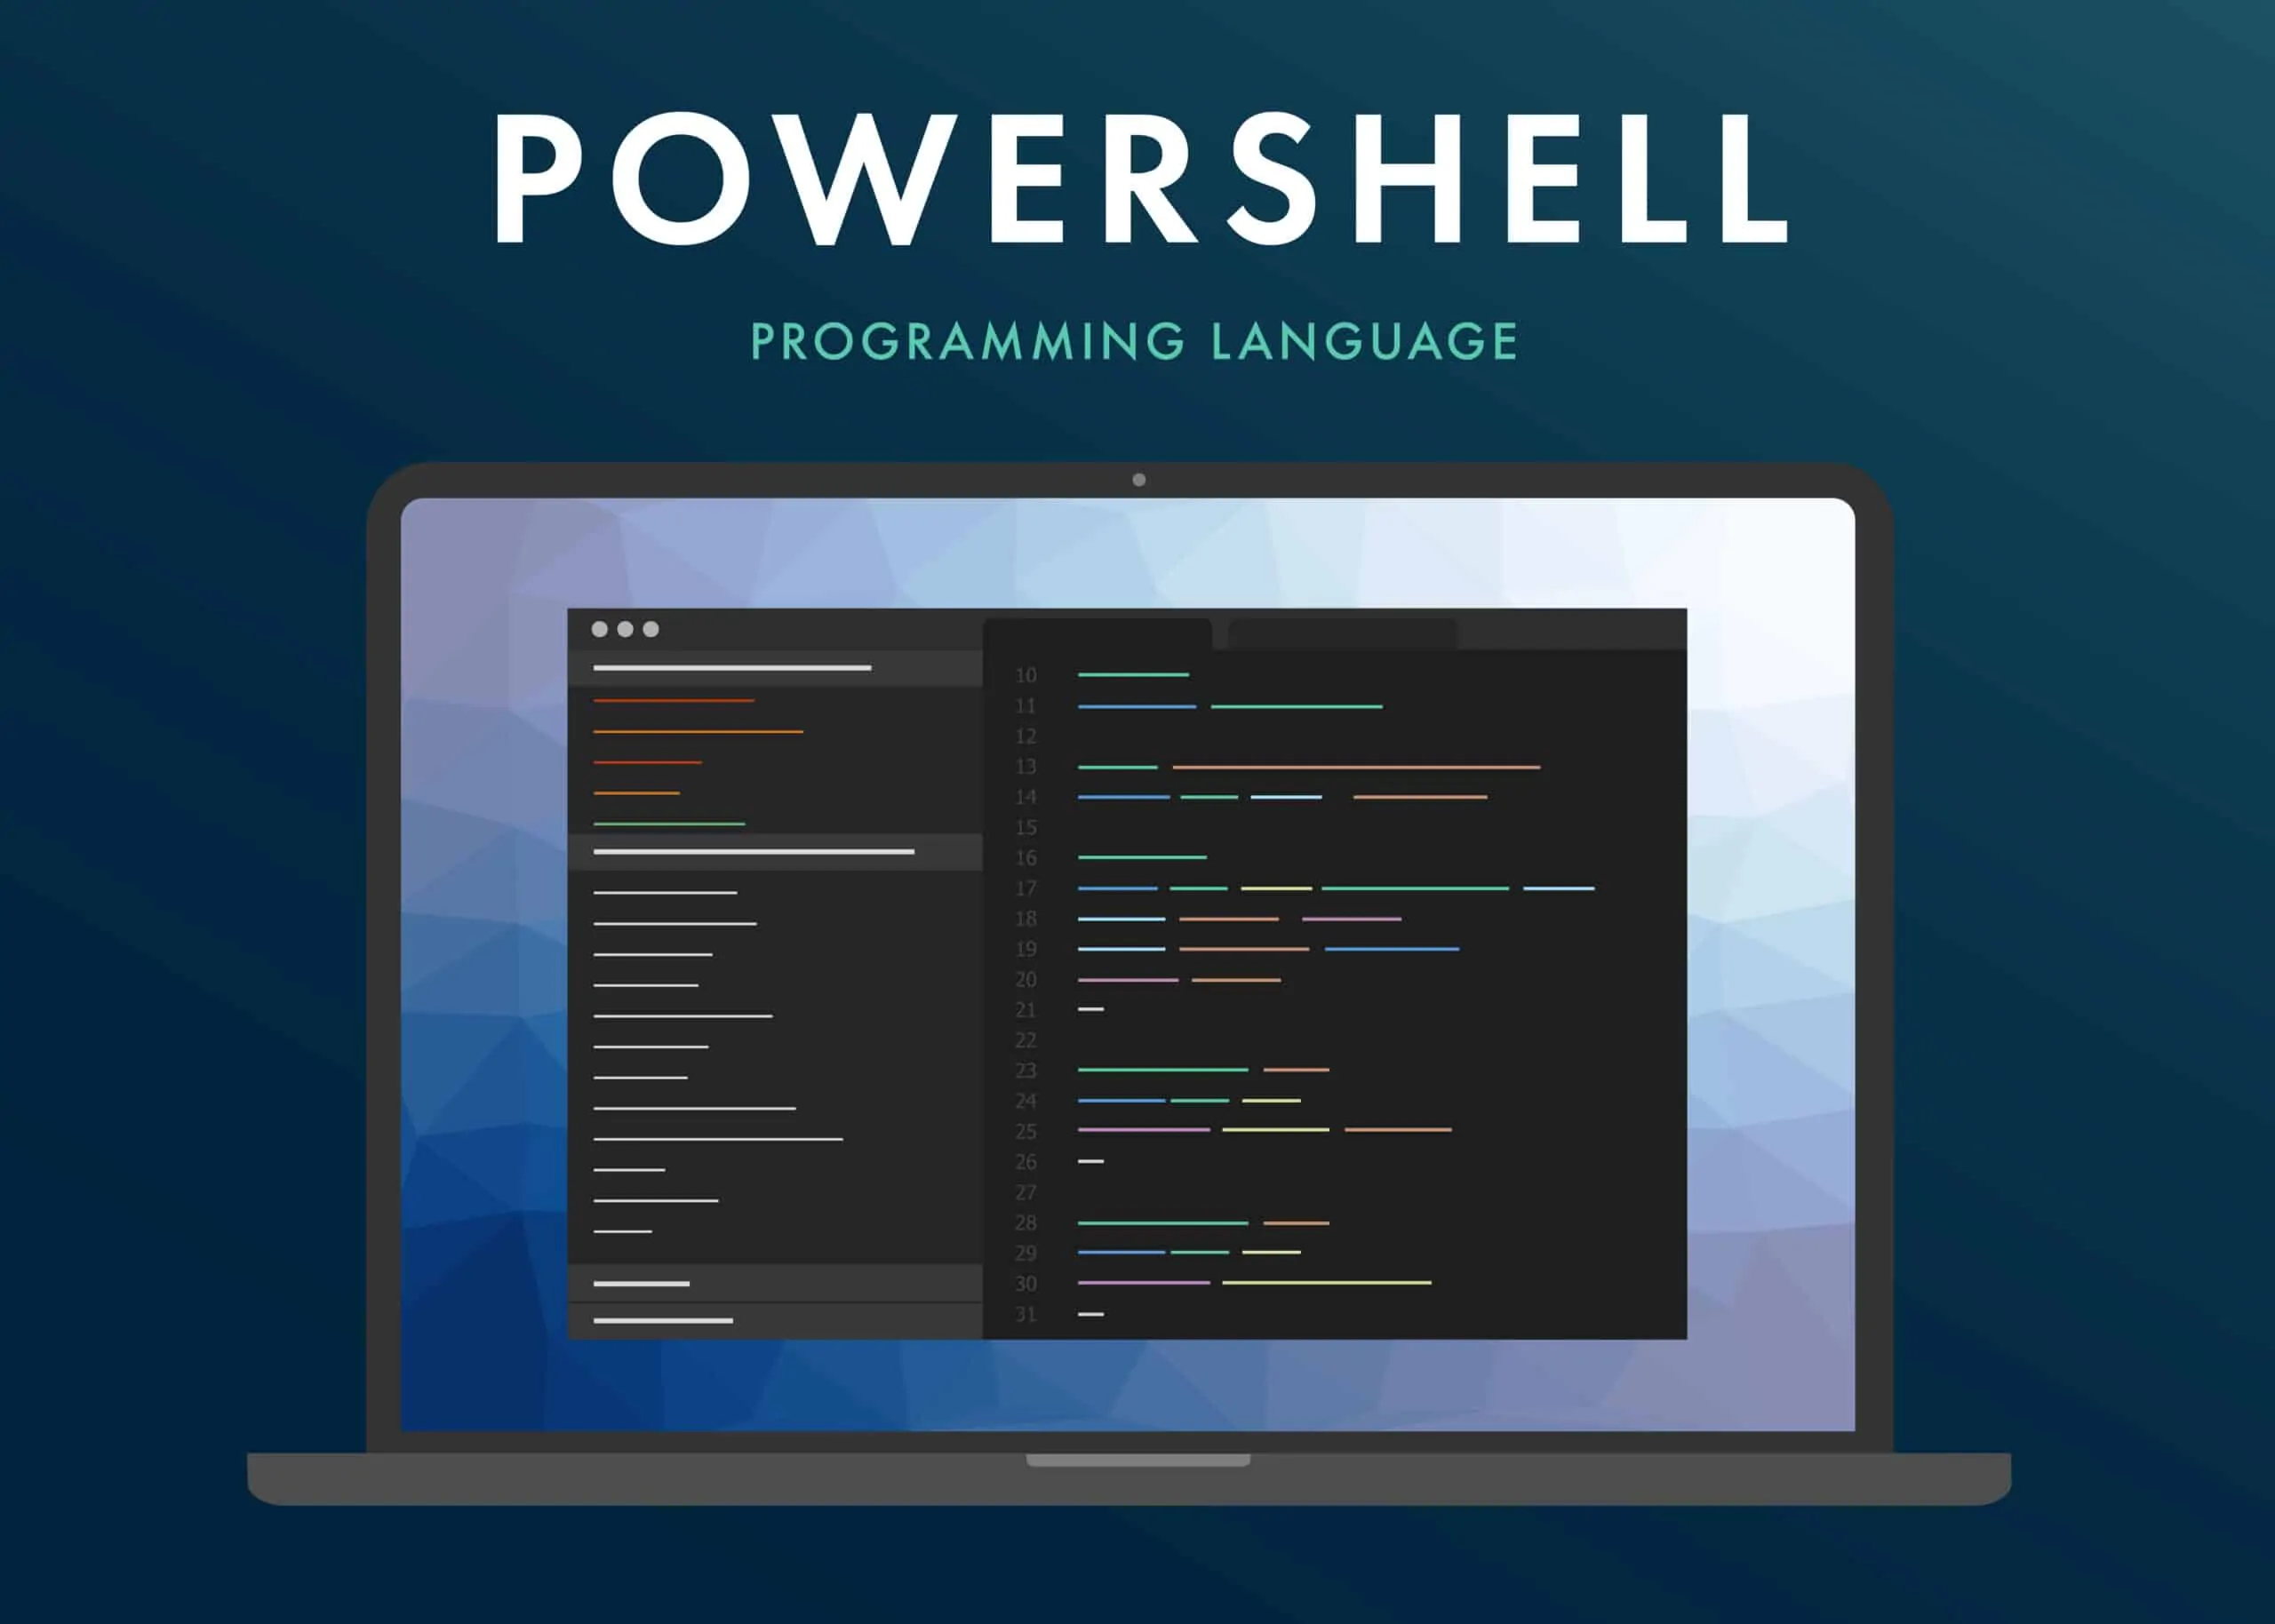 Most Useful Powershell Commands